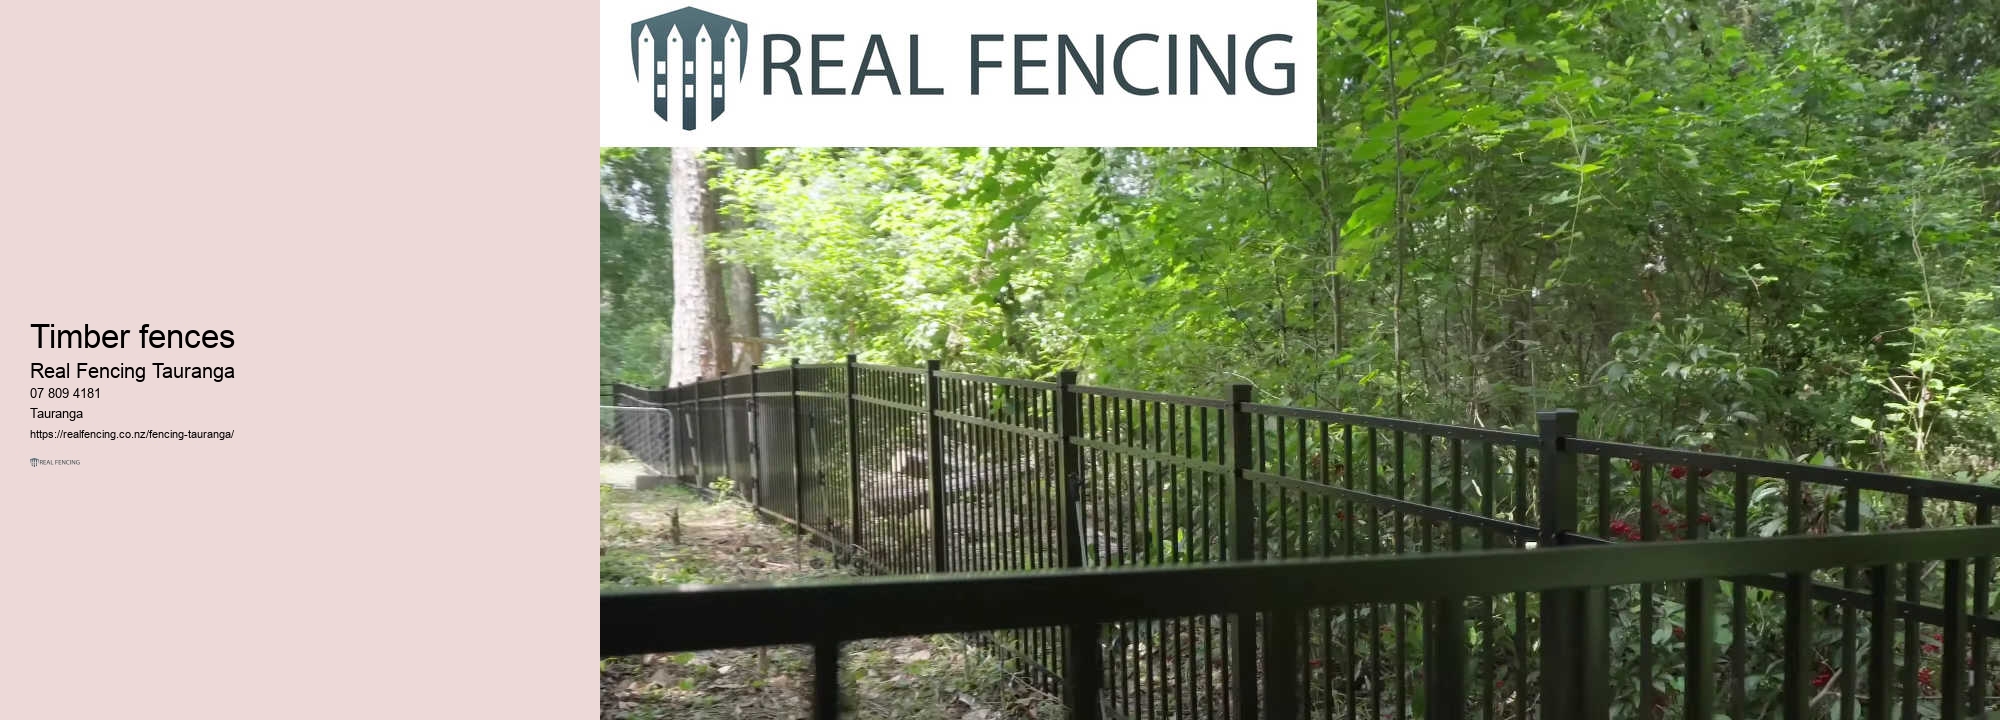 Pool fencing above ground pool